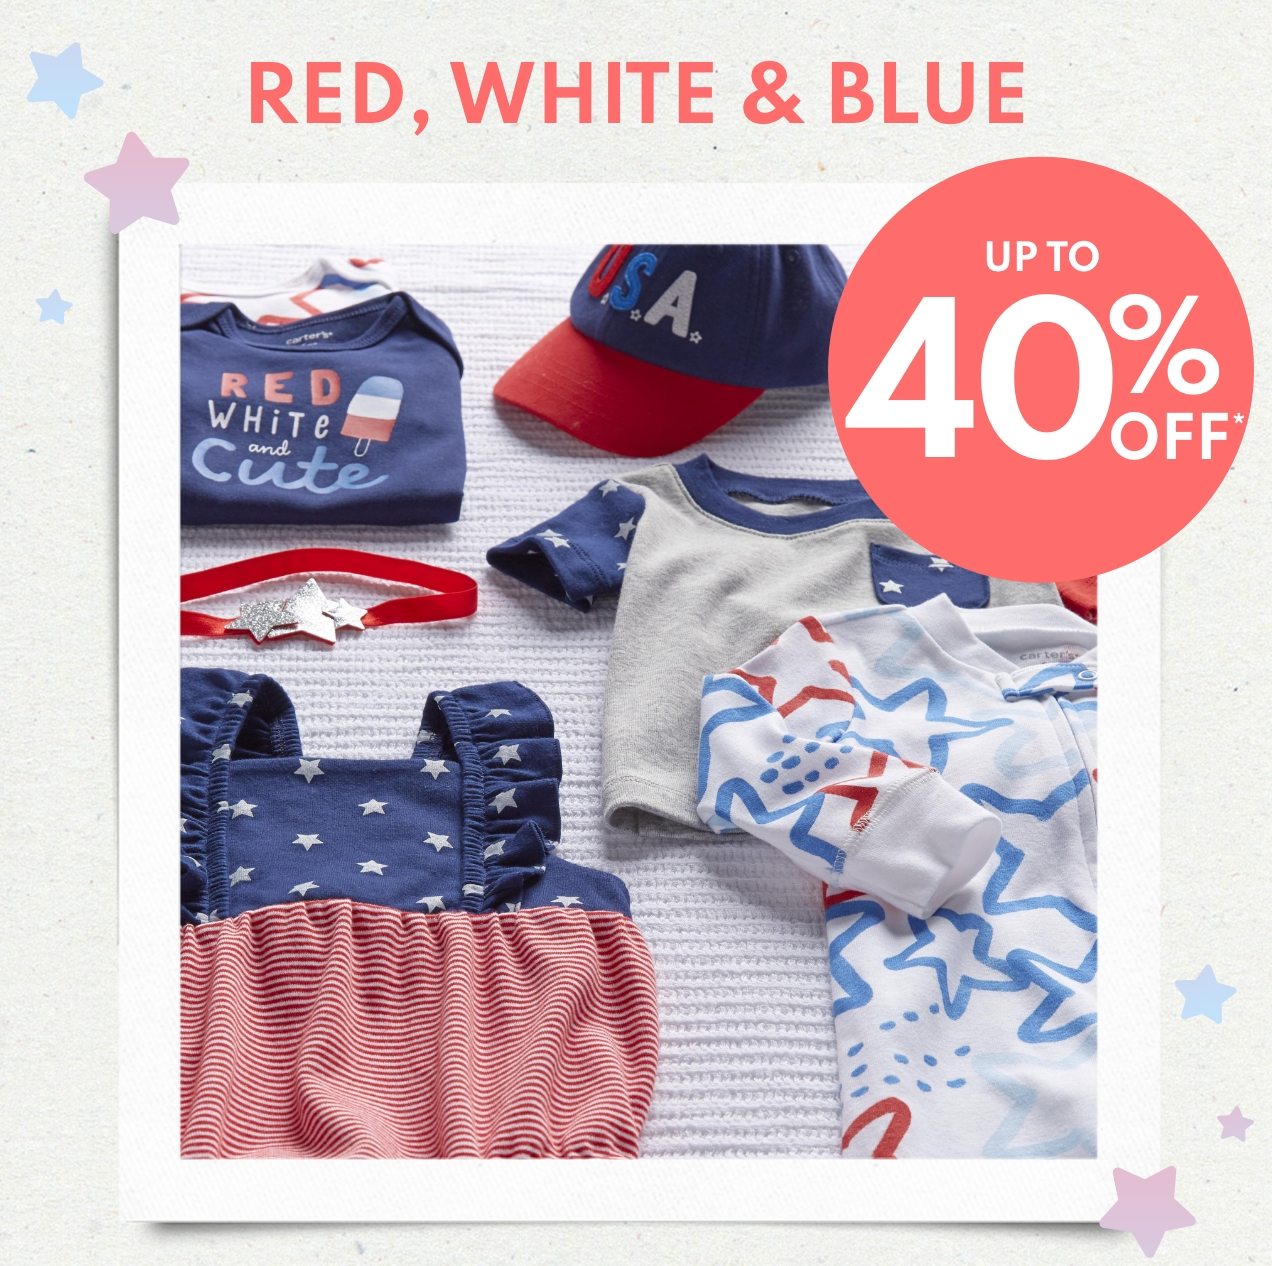 RED, WHITE & BLUE | UP TO 40% OFF* 